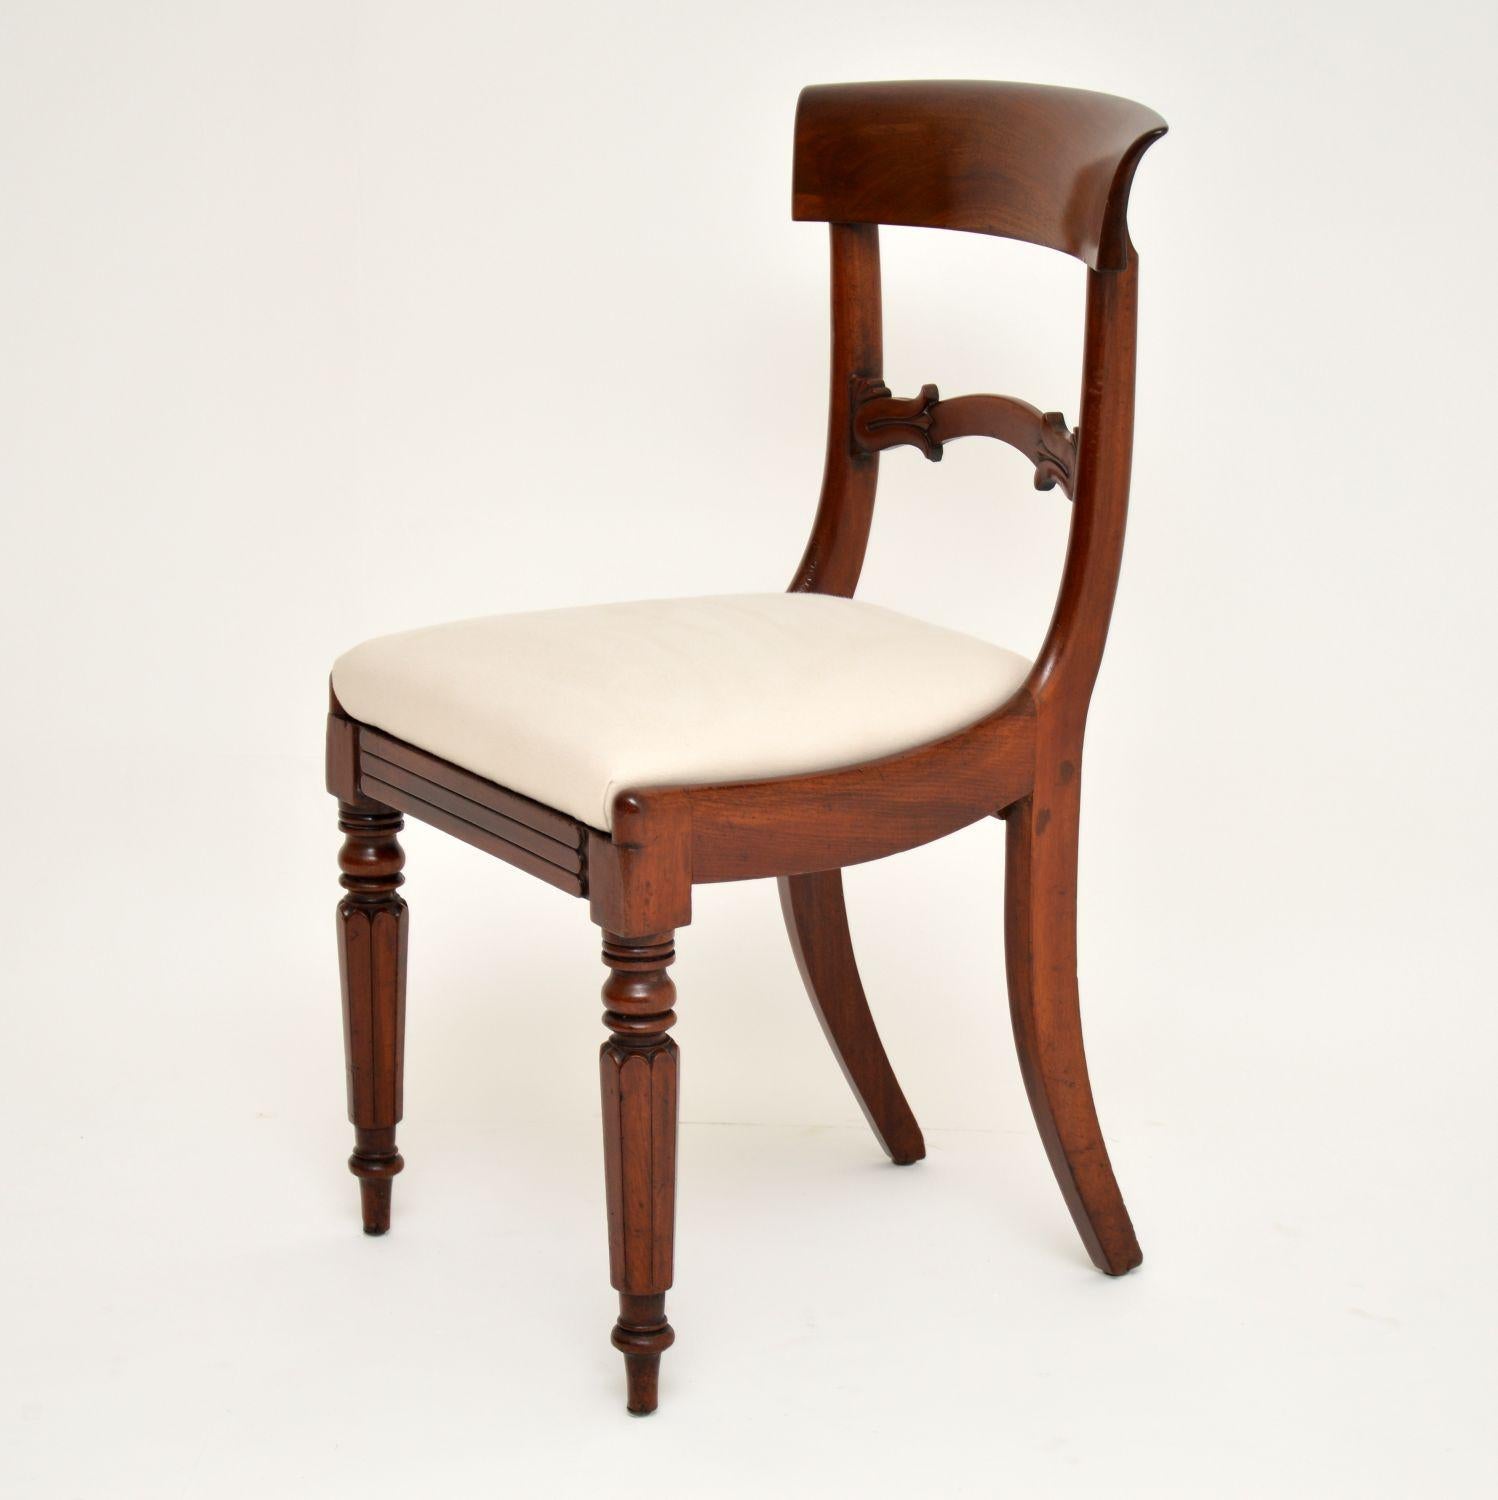 Mid-19th Century Antique Victorian Mahogany Dining Chairs